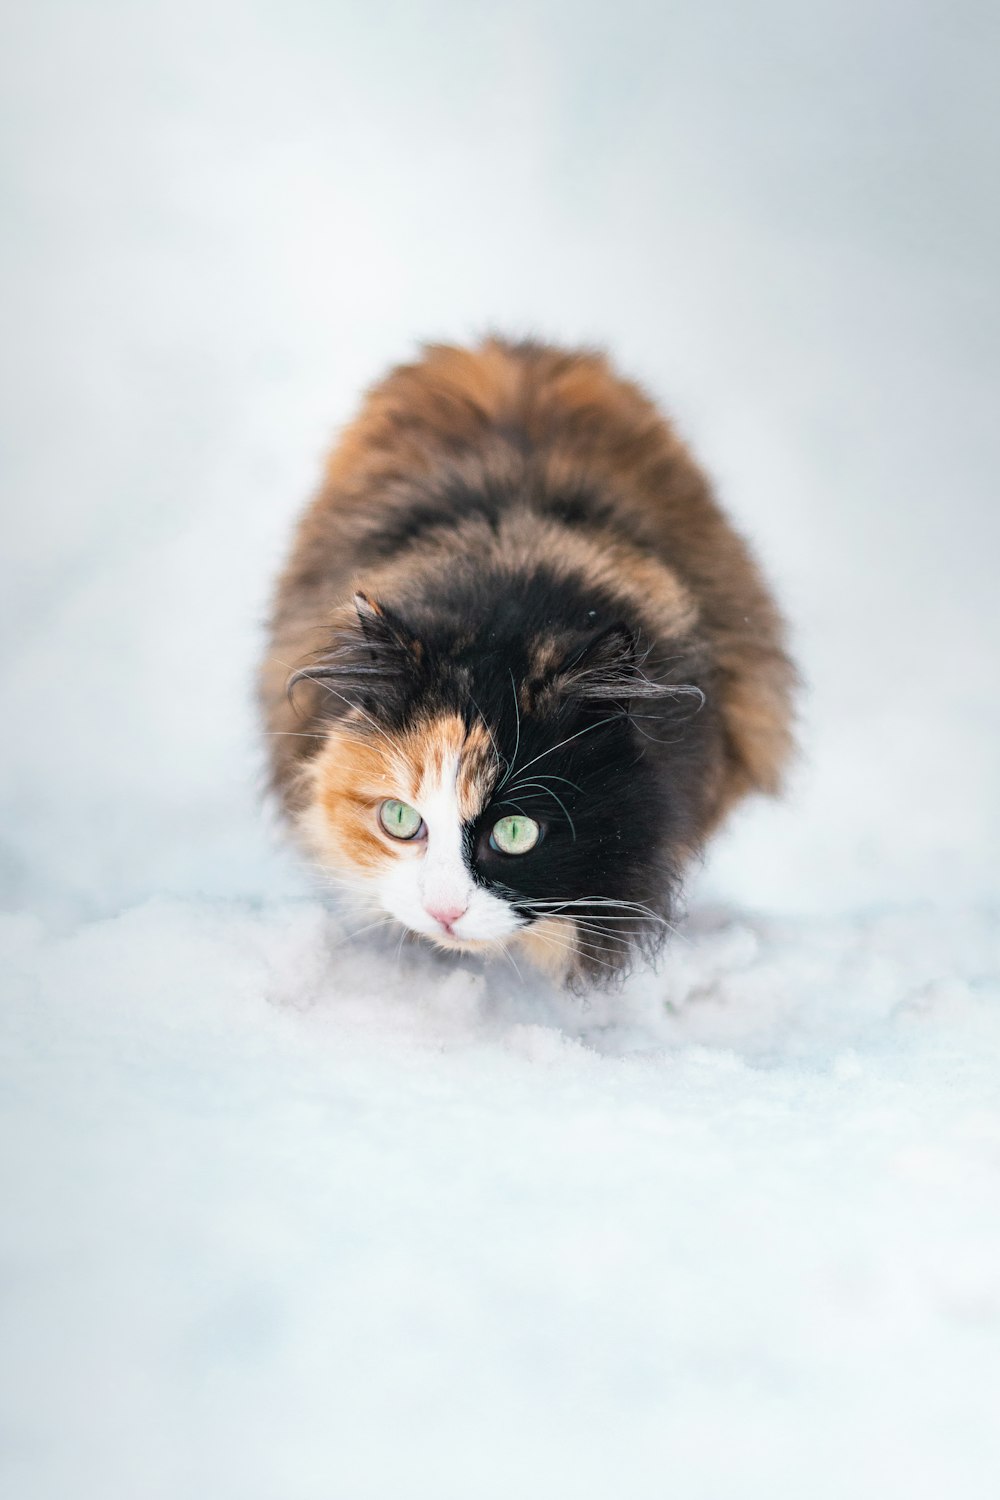 a cat with green eyes walking in the snow